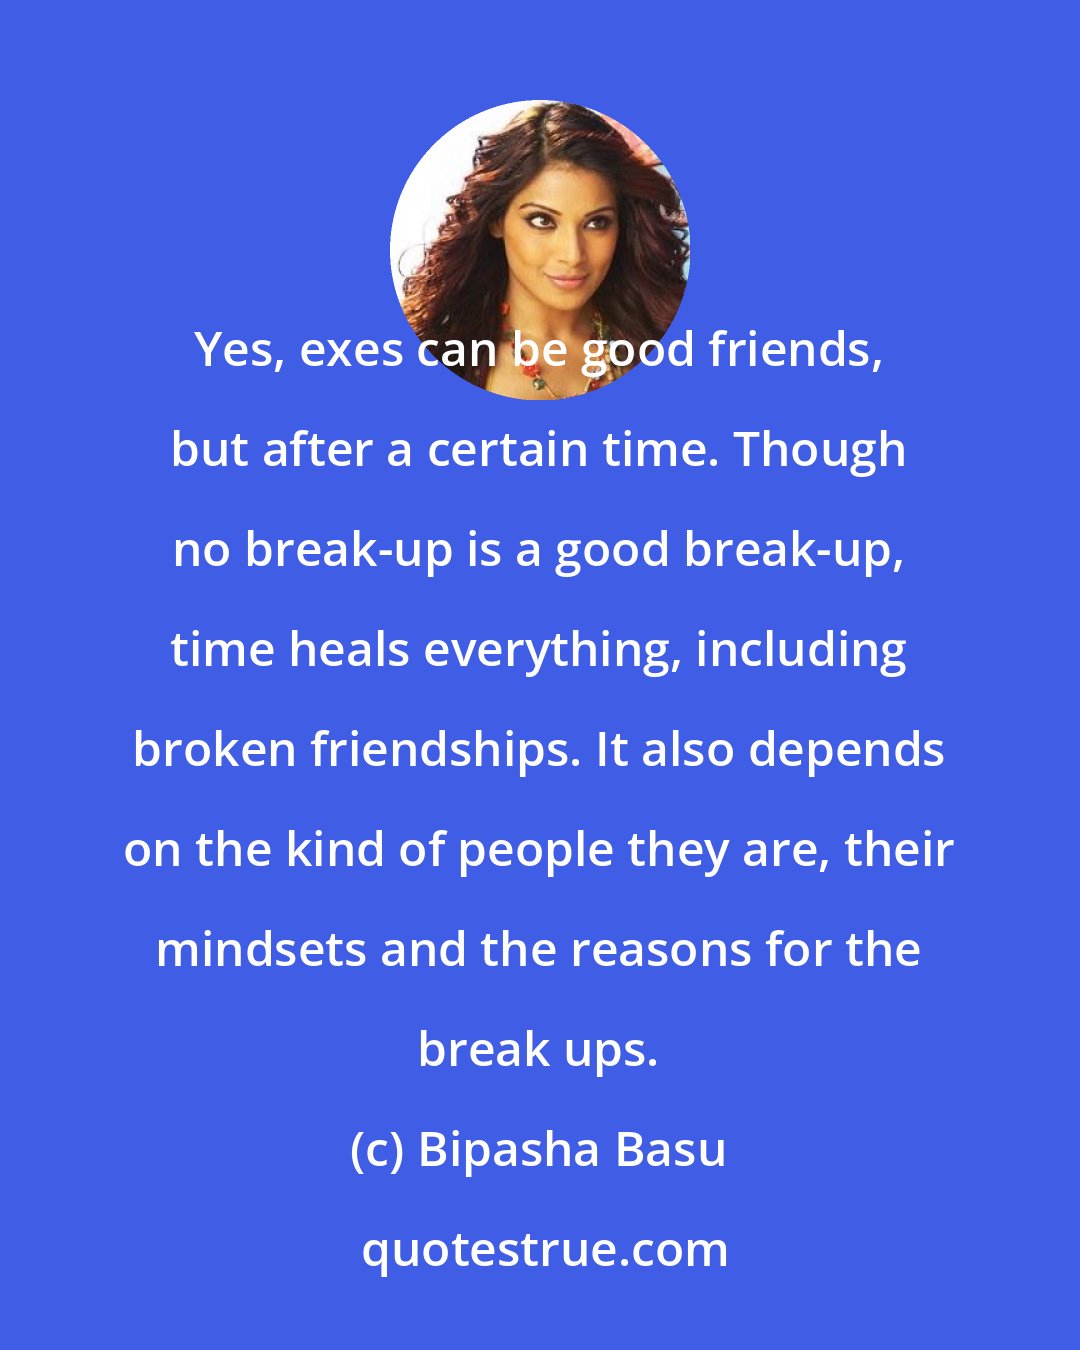 Bipasha Basu: Yes, exes can be good friends, but after a certain time. Though no break-up is a good break-up, time heals everything, including broken friendships. It also depends on the kind of people they are, their mindsets and the reasons for the break ups.